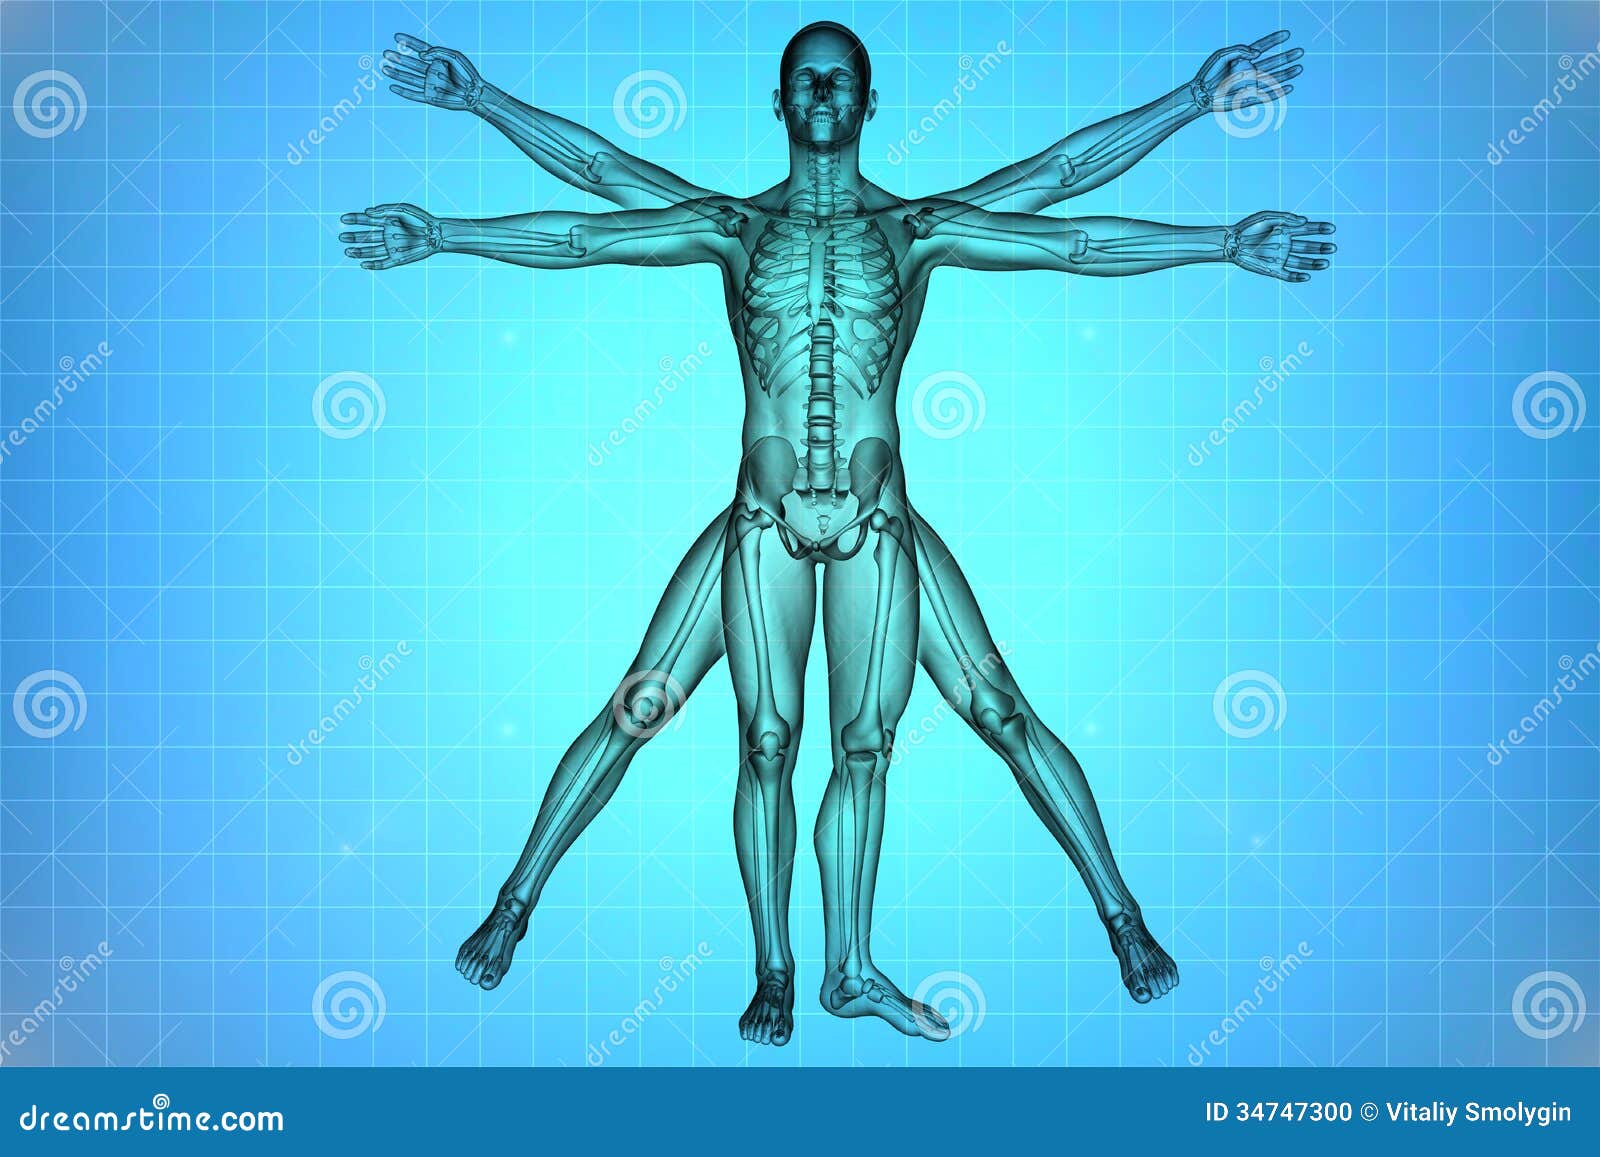 Vitruvian Man High-Res Stock Photo - Getty Images